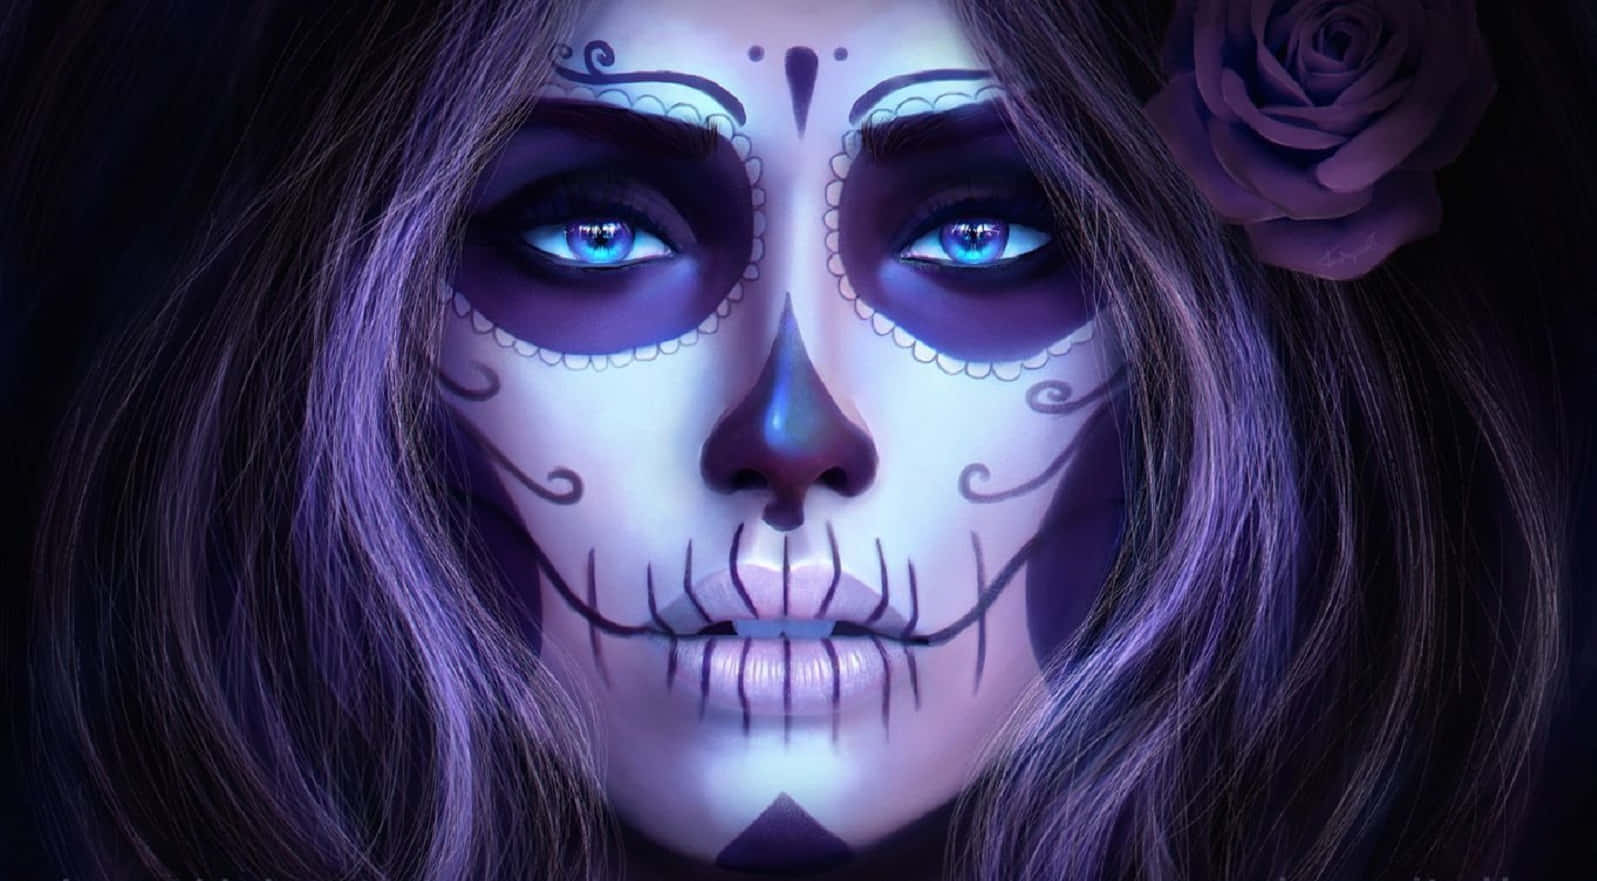 Celebrate life and honour the departed with Day of the Dead festivities.